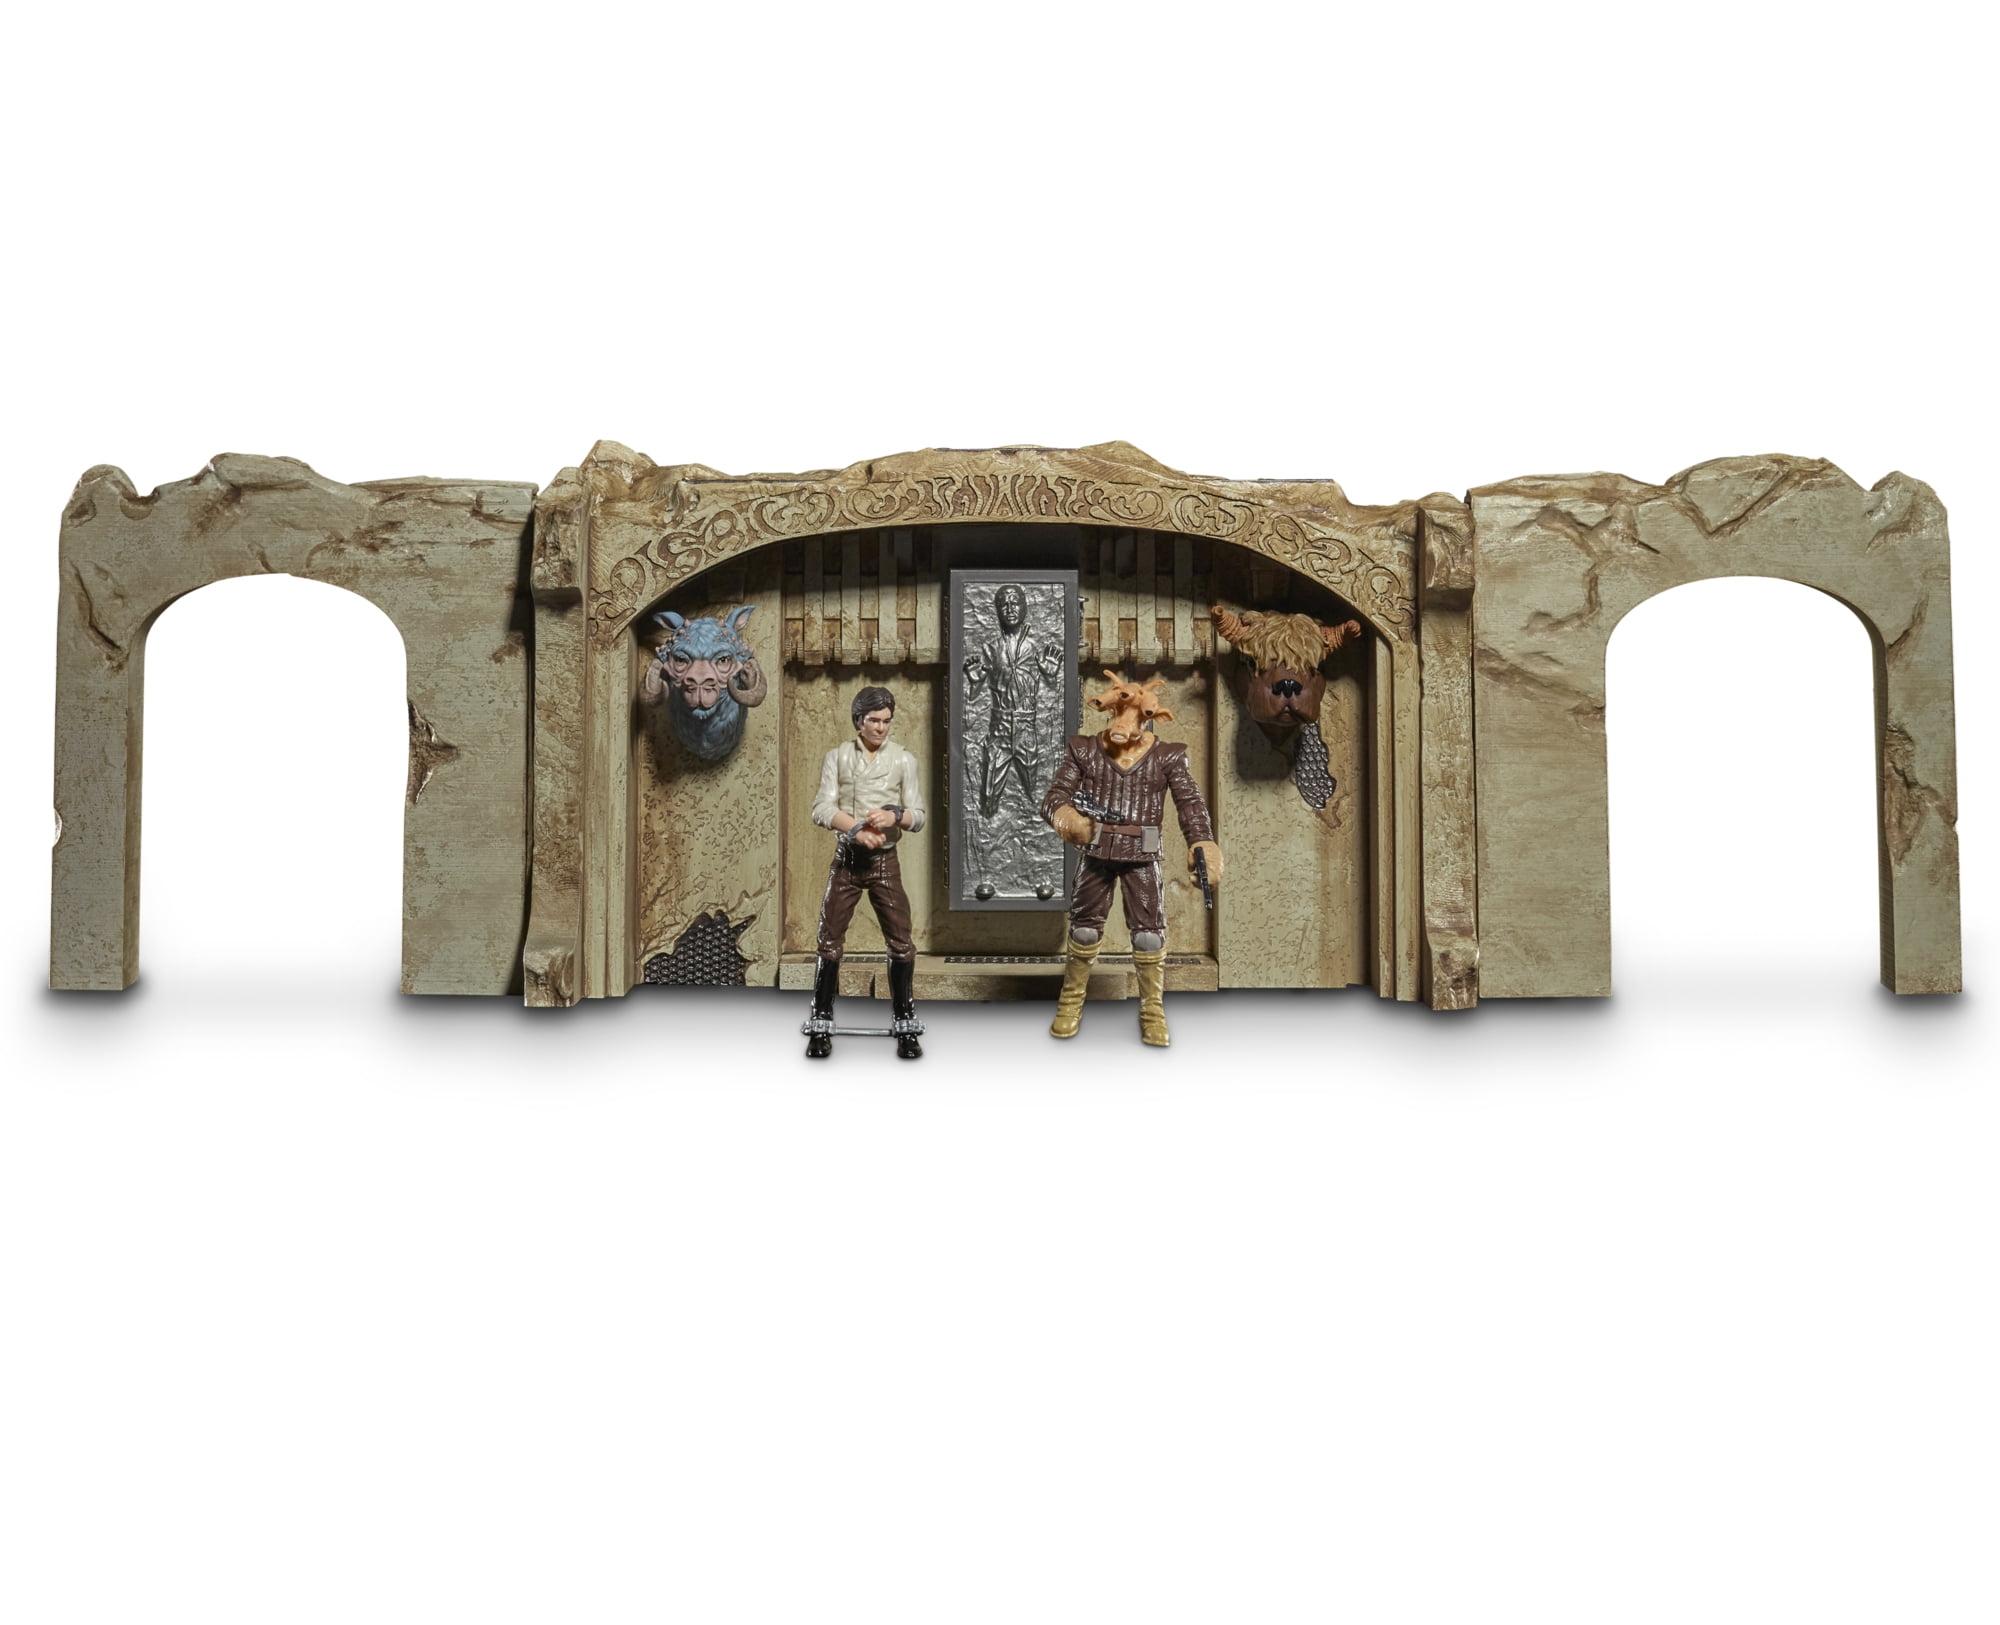 Details about   Star Wars Micro Machines Action Fleet Gamorrean Guard Jabba's Palace Figure #2 